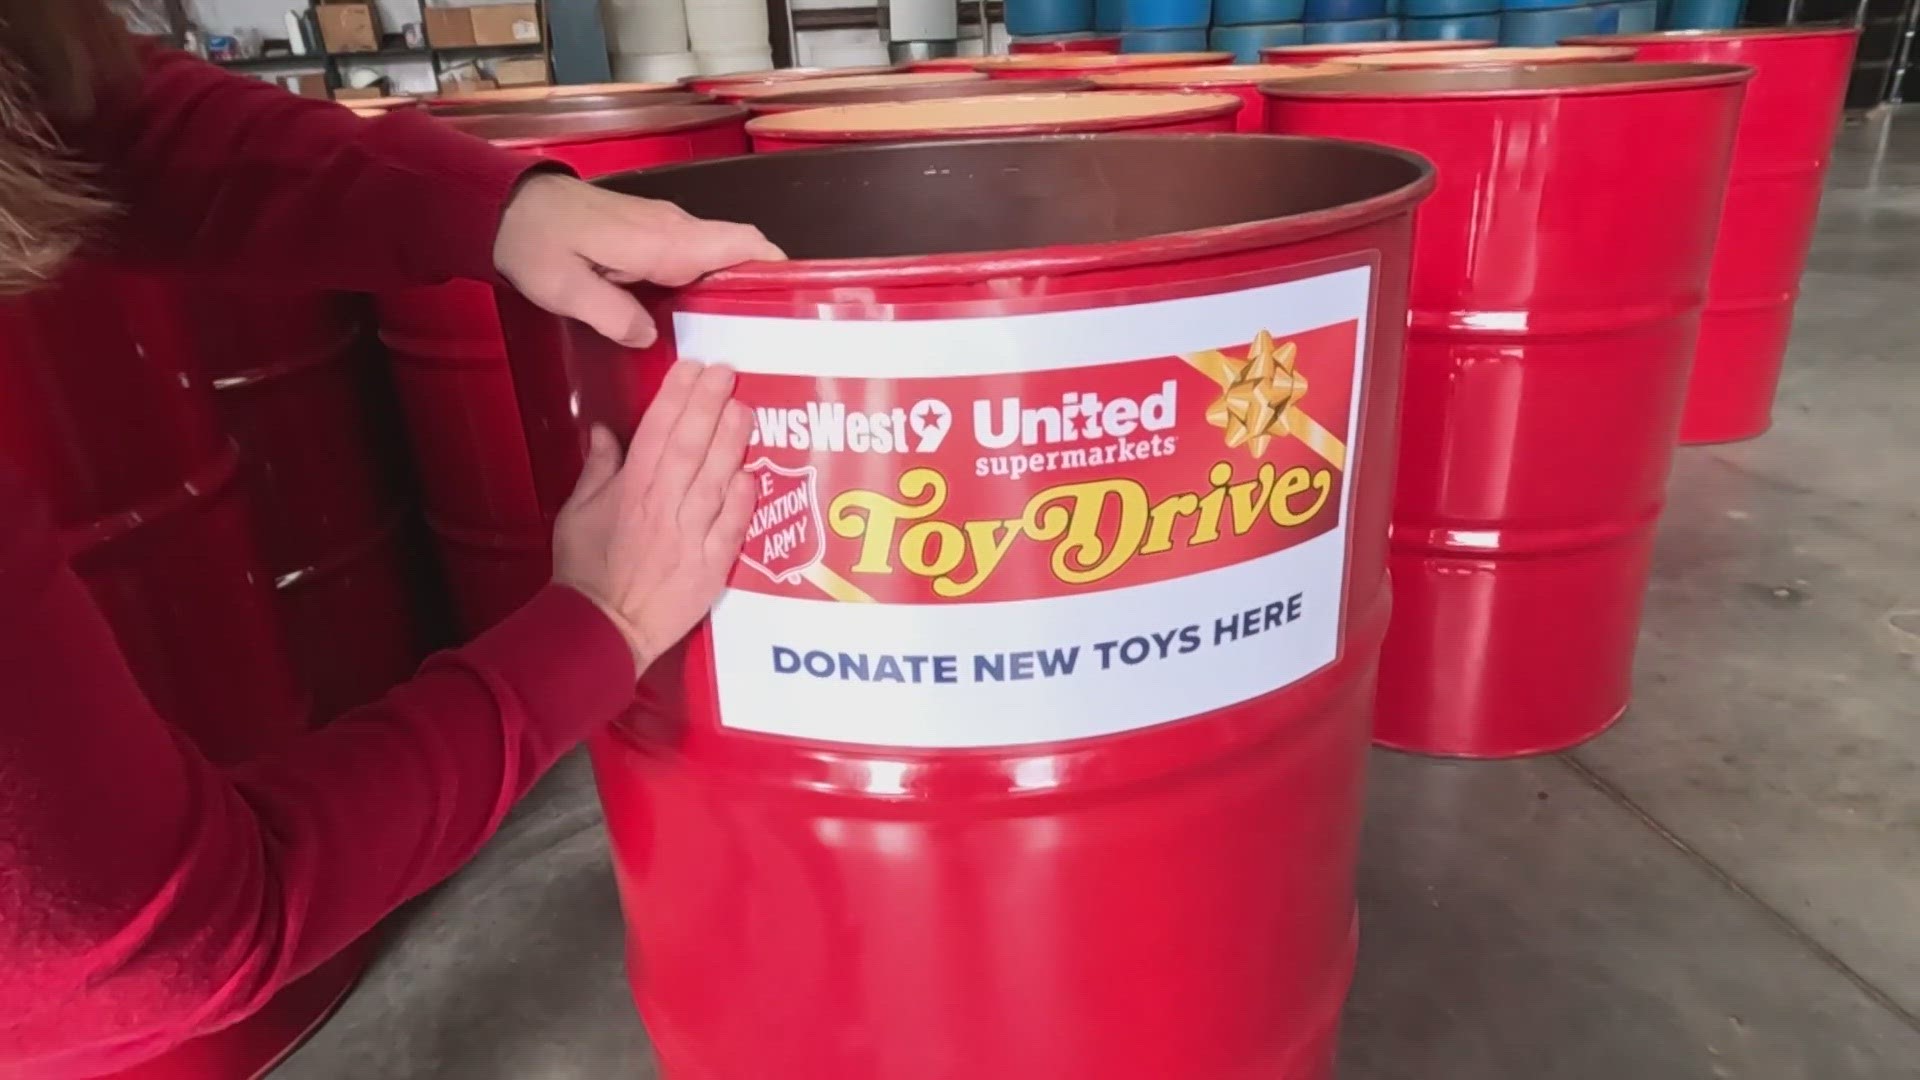 In November, you'll find the Toy Drive barrels at businesses all over the Permian Basin.